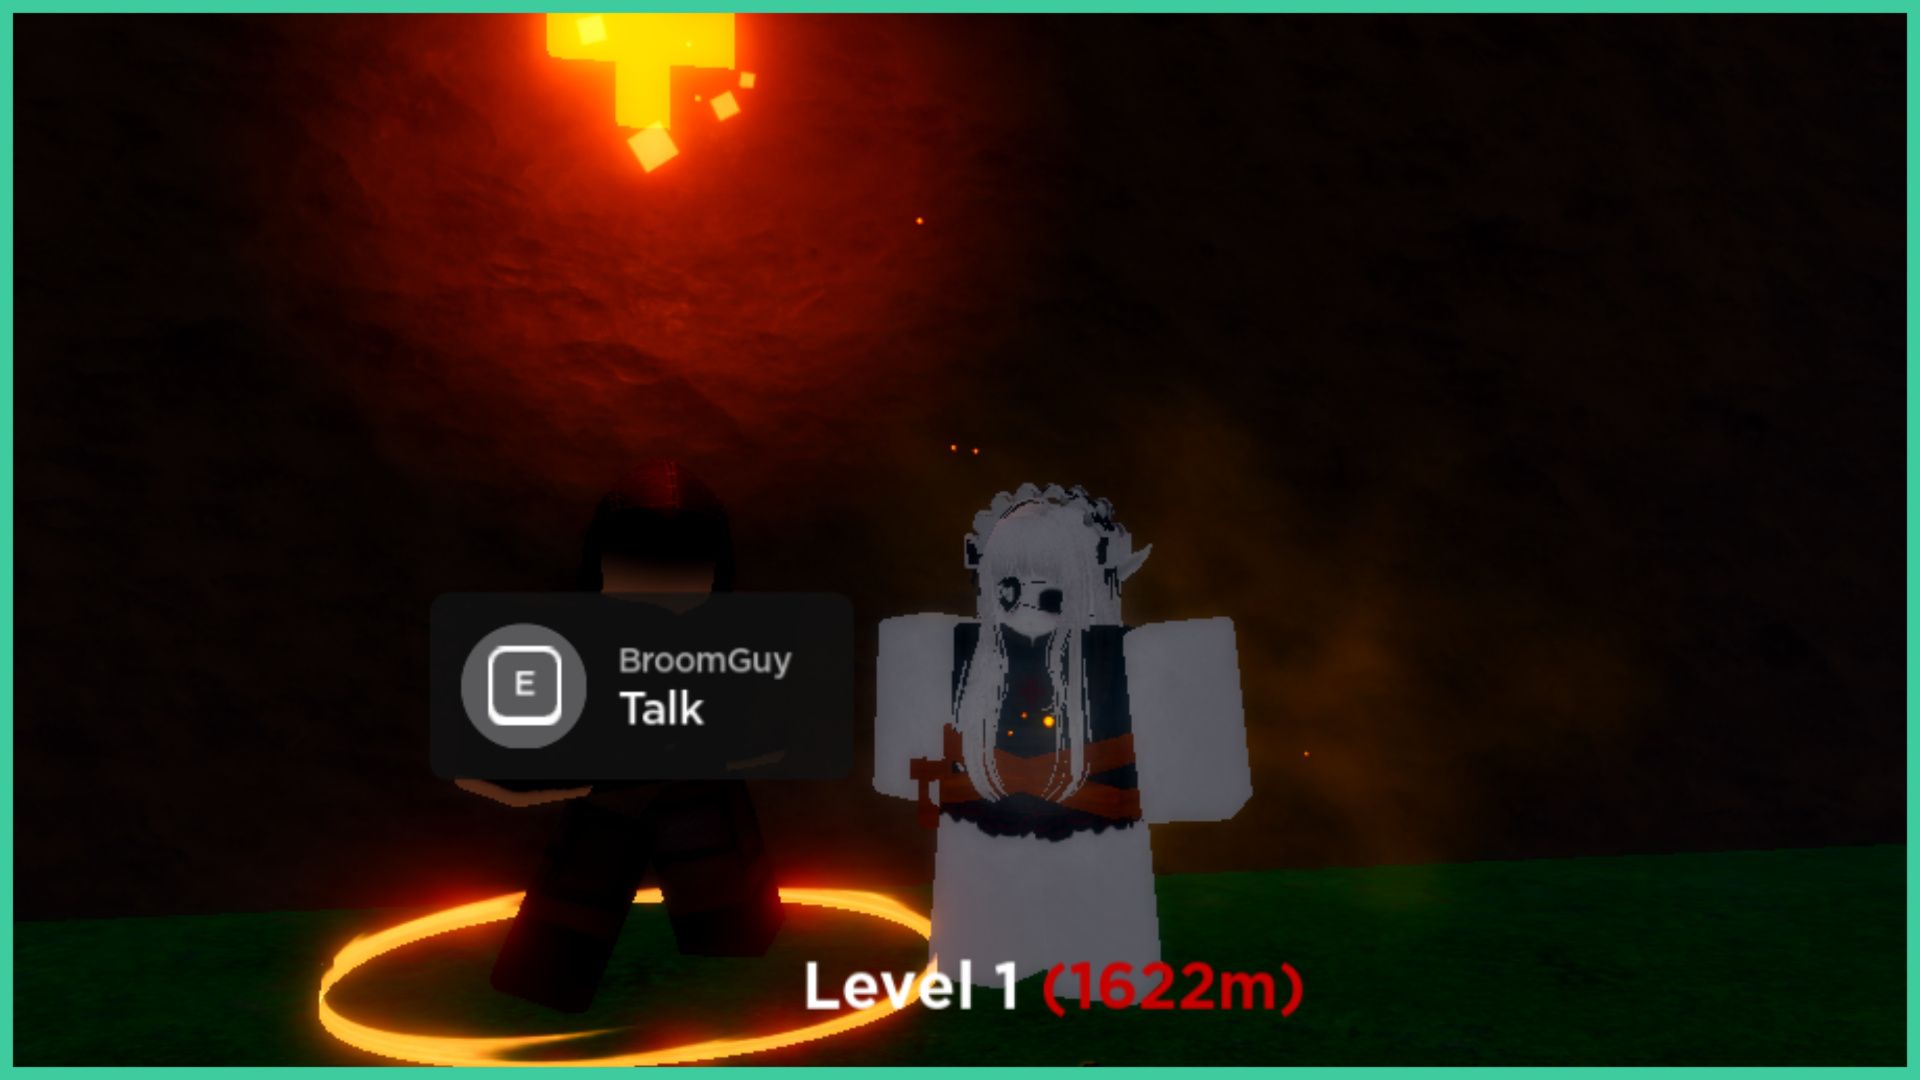 feature image for our how to fly in grimoires era guide, the image features a screenshot of a roblox player standing next to the broom guy NPC from grimoires era as he wears a hood and has a plus sign that is glowing above his head